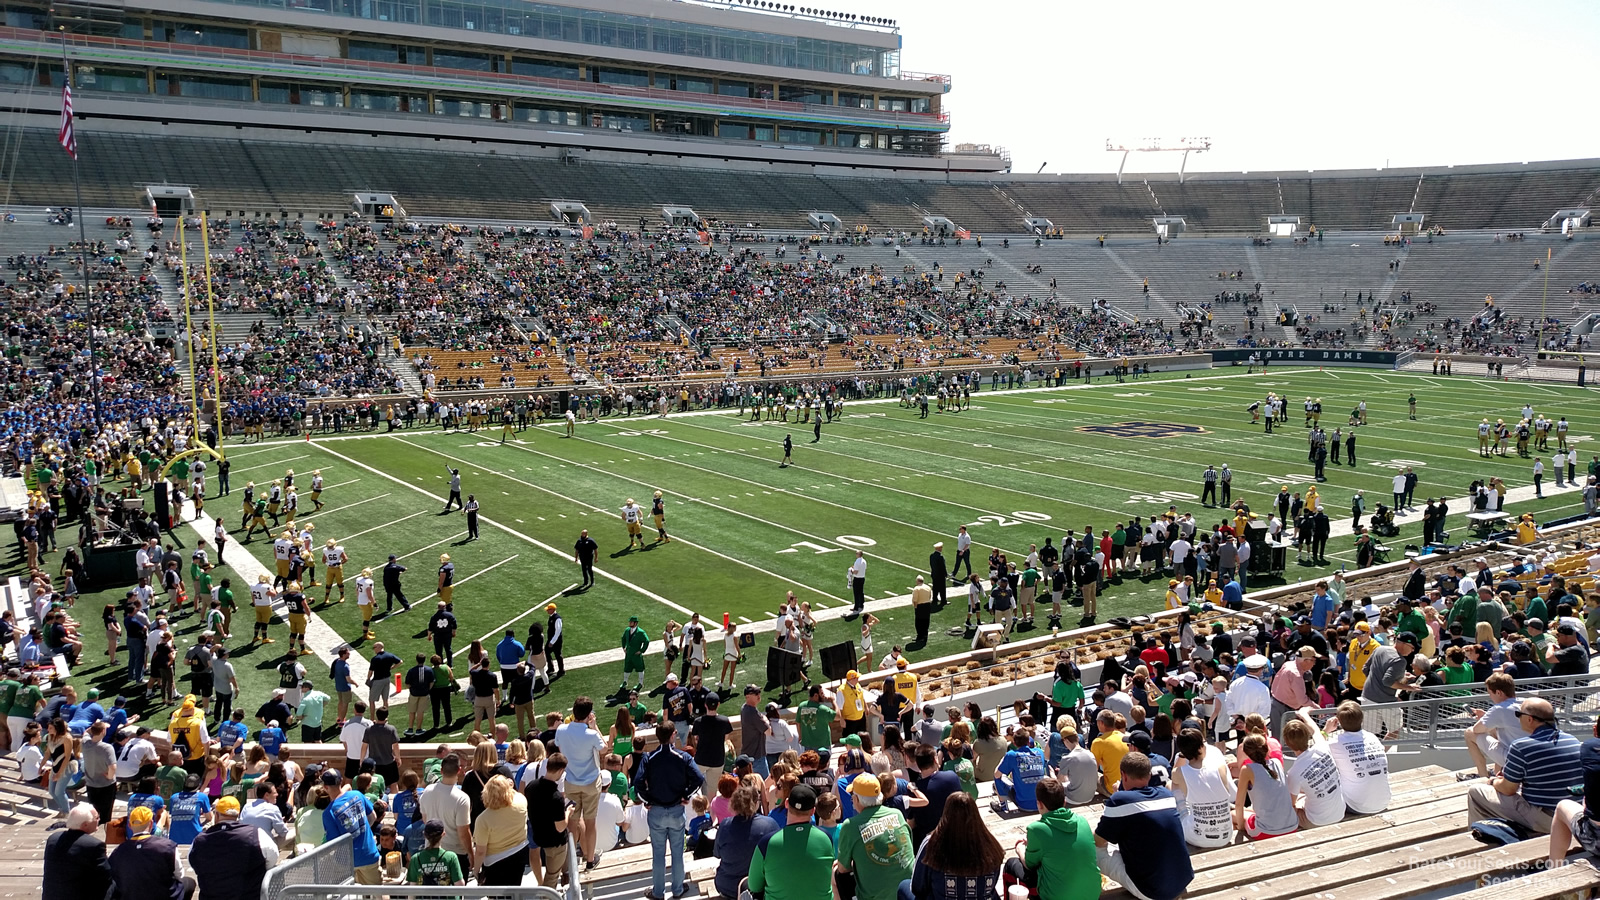 section 32, row 36 seat view  - notre dame stadium